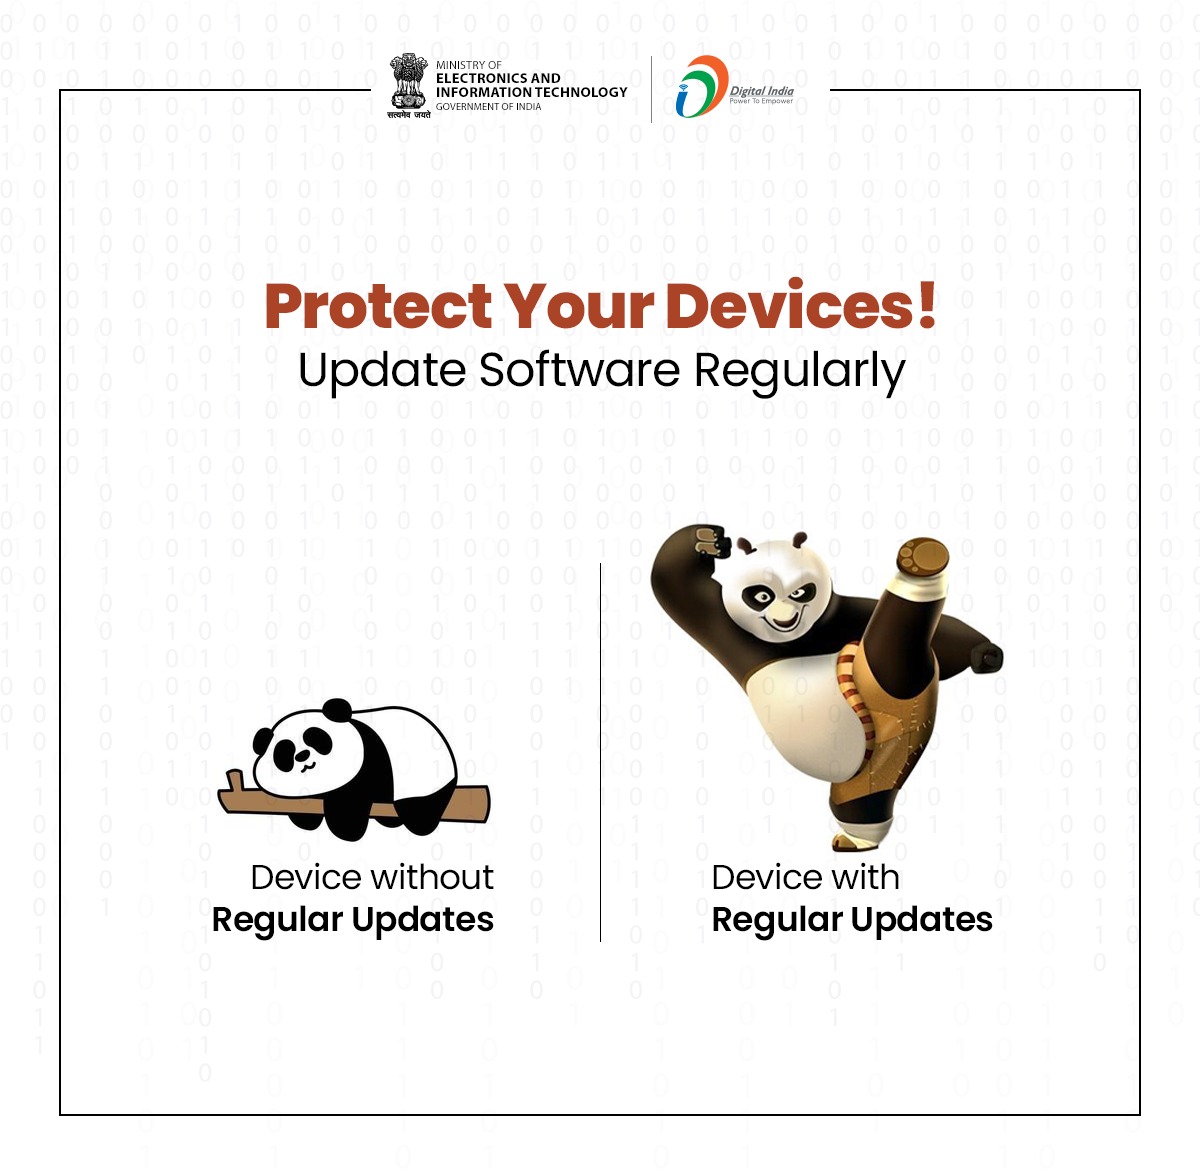 Stay updated! Enable automatic software updates to protect against cyber threats. Keep your devices secure. 🛡️#SoftwareSecurity #CyberSafetyTips #DigitalIndia